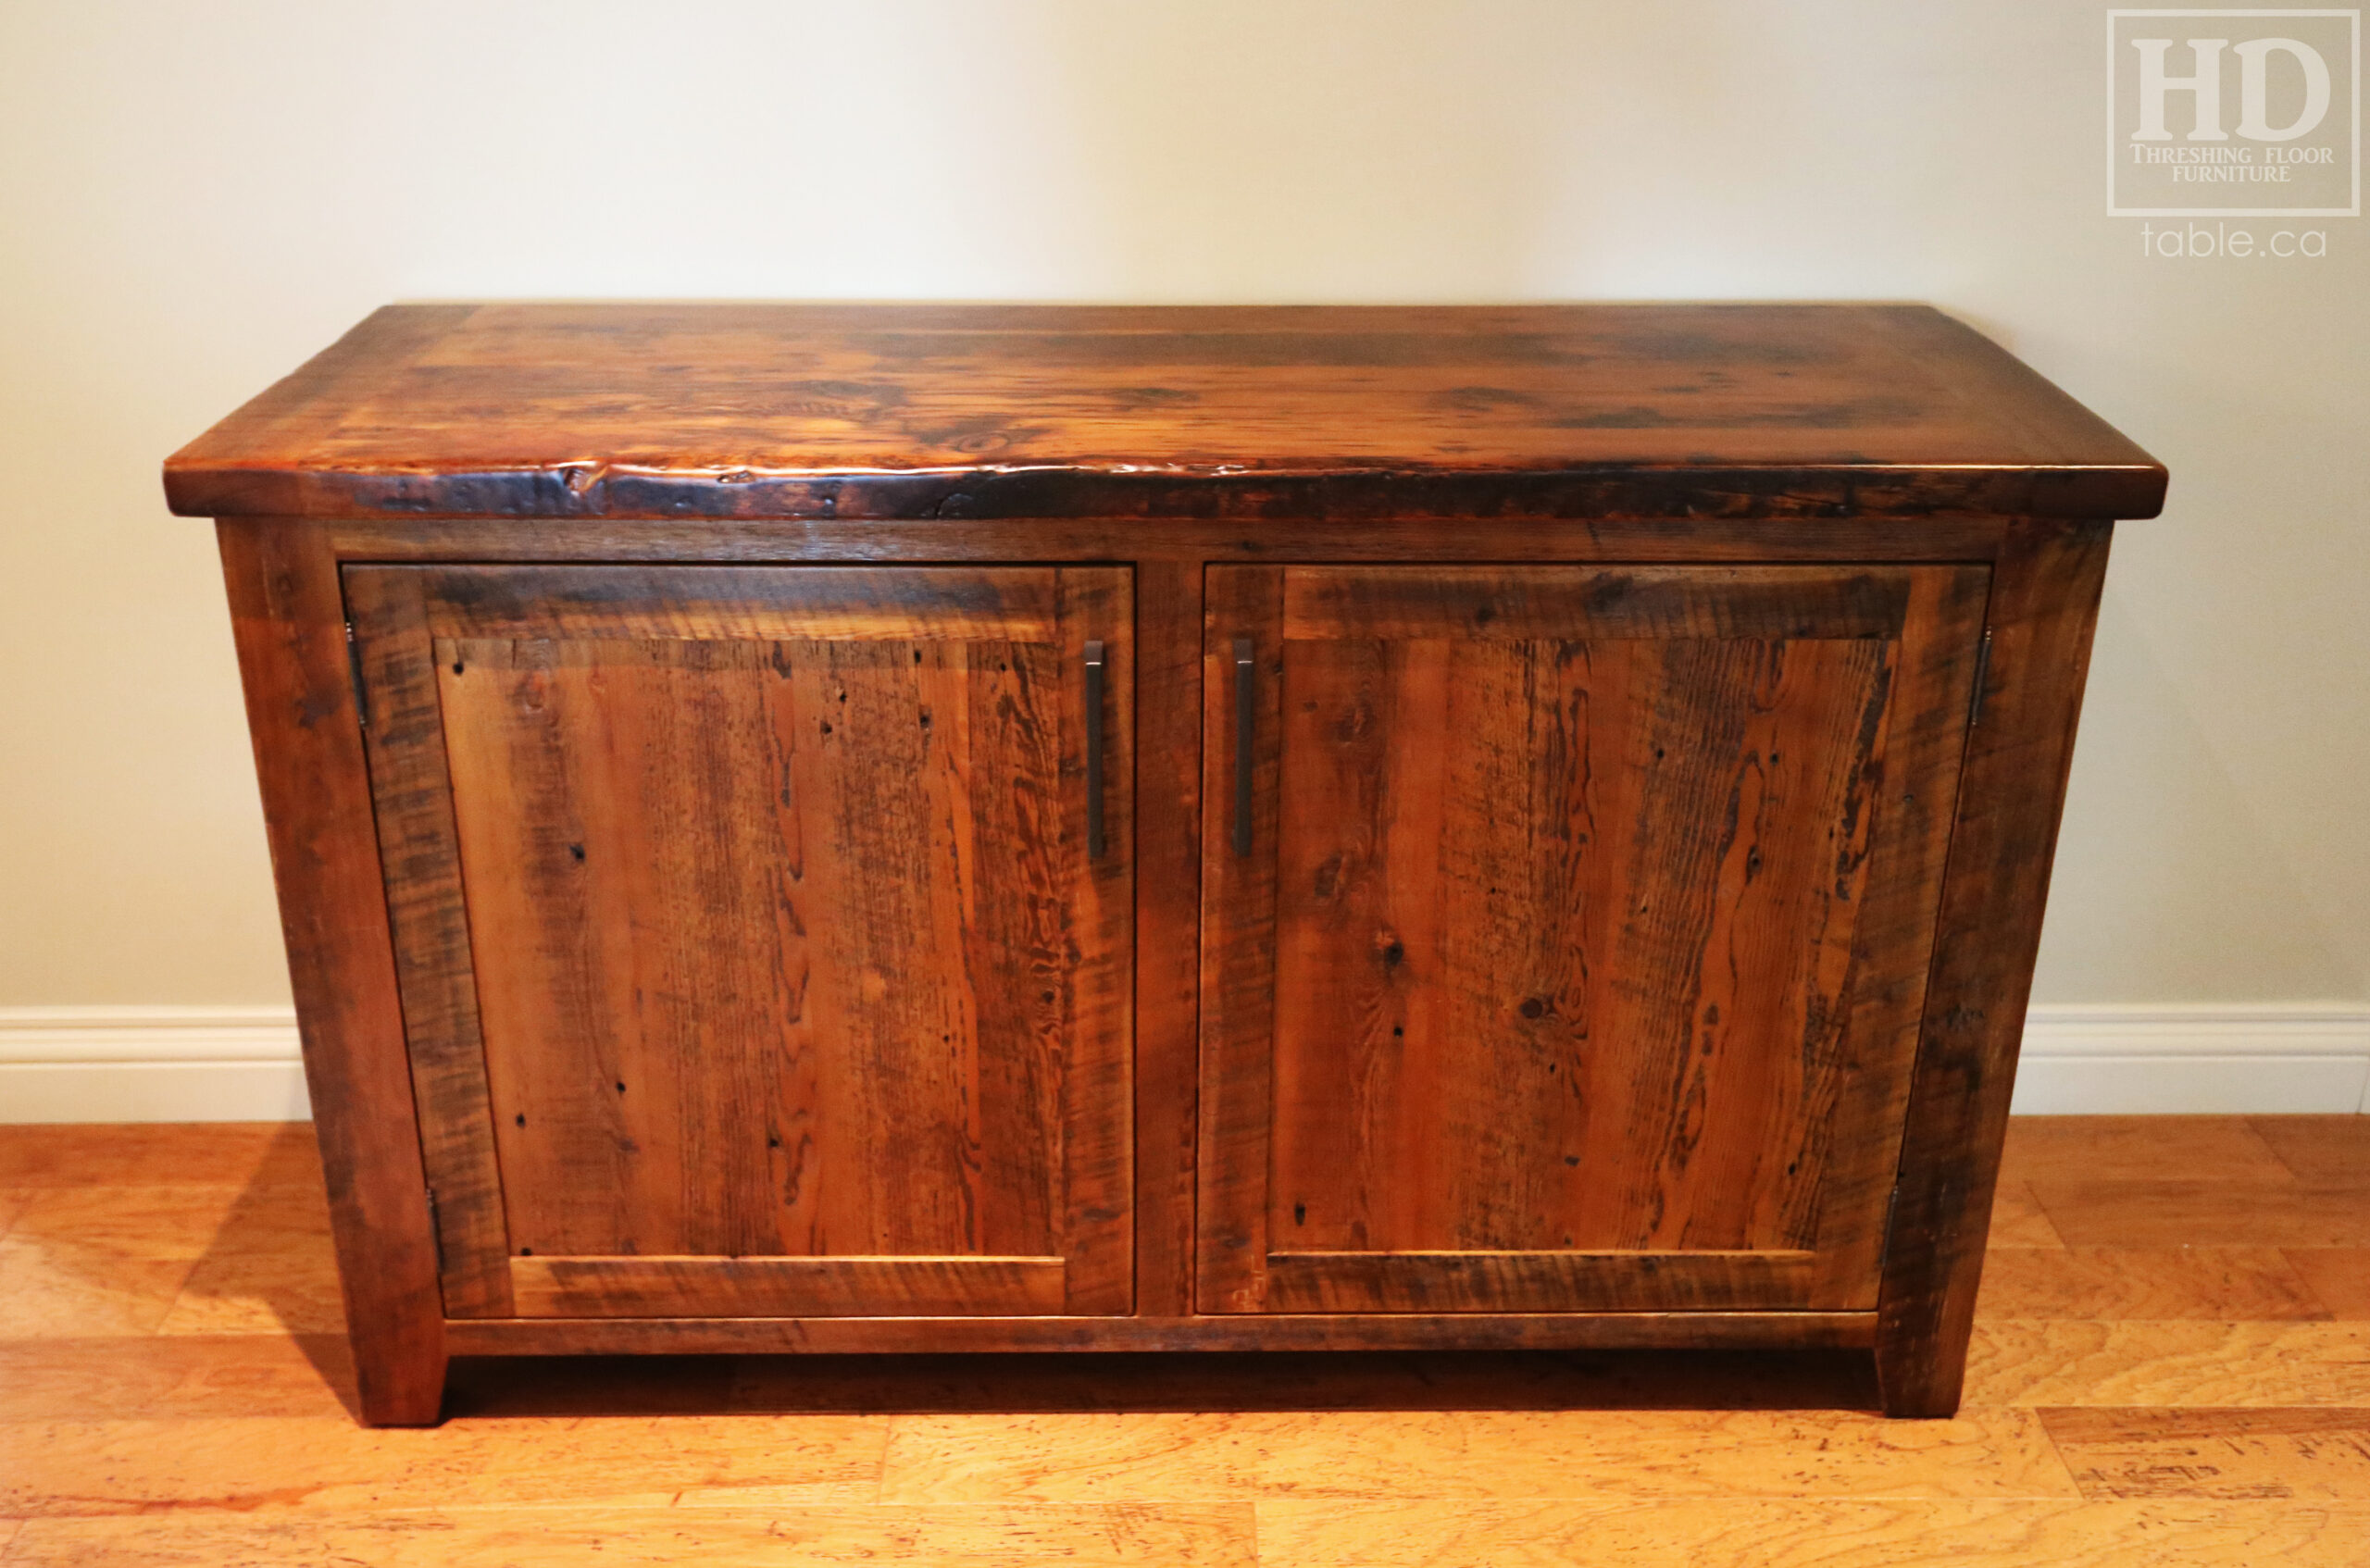 60" Reclaimed Ontario Barnwood Buffet we made for a Morpeth Home - 22" deep - 36" height – 2 Doors - Reclaimed Hemlock Threshing Floor & Grainery Board Construction - Original edges & distressing maintained - Lee Valley Hardware - Premium epoxy + satin polyurethane finish - www.table.ca 